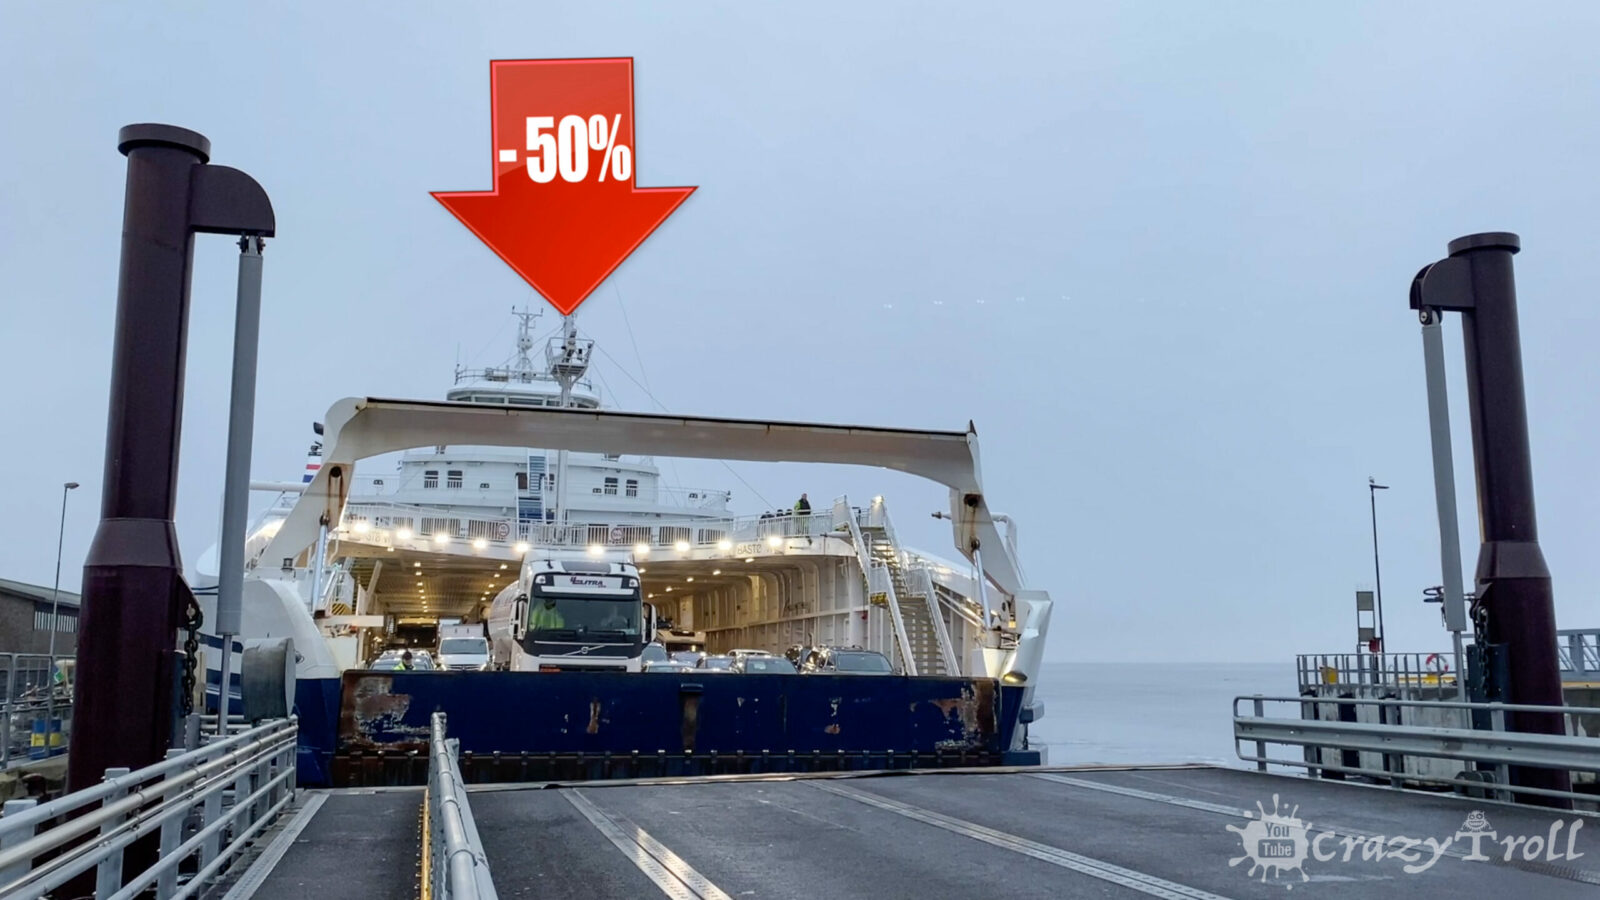 AutoPASS for the ferry in Norway - Get a 50% discount!